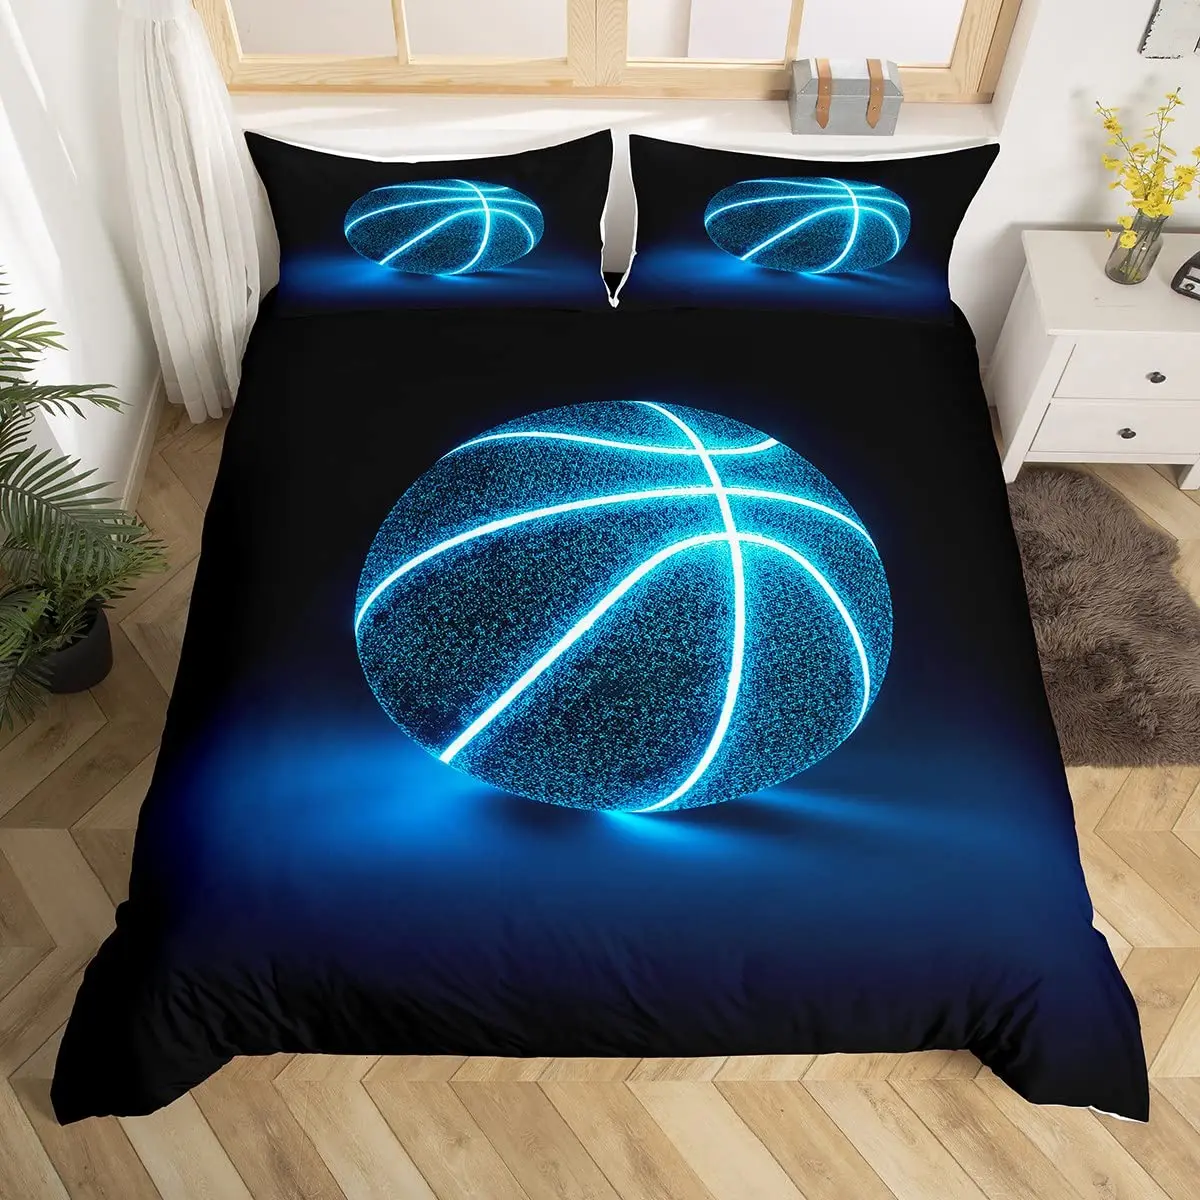 

Basketball Duvet Cover Set Sports Theme Bedding Set for Boys Teens Men with Motivated No Failure Pattern Soft Comforter